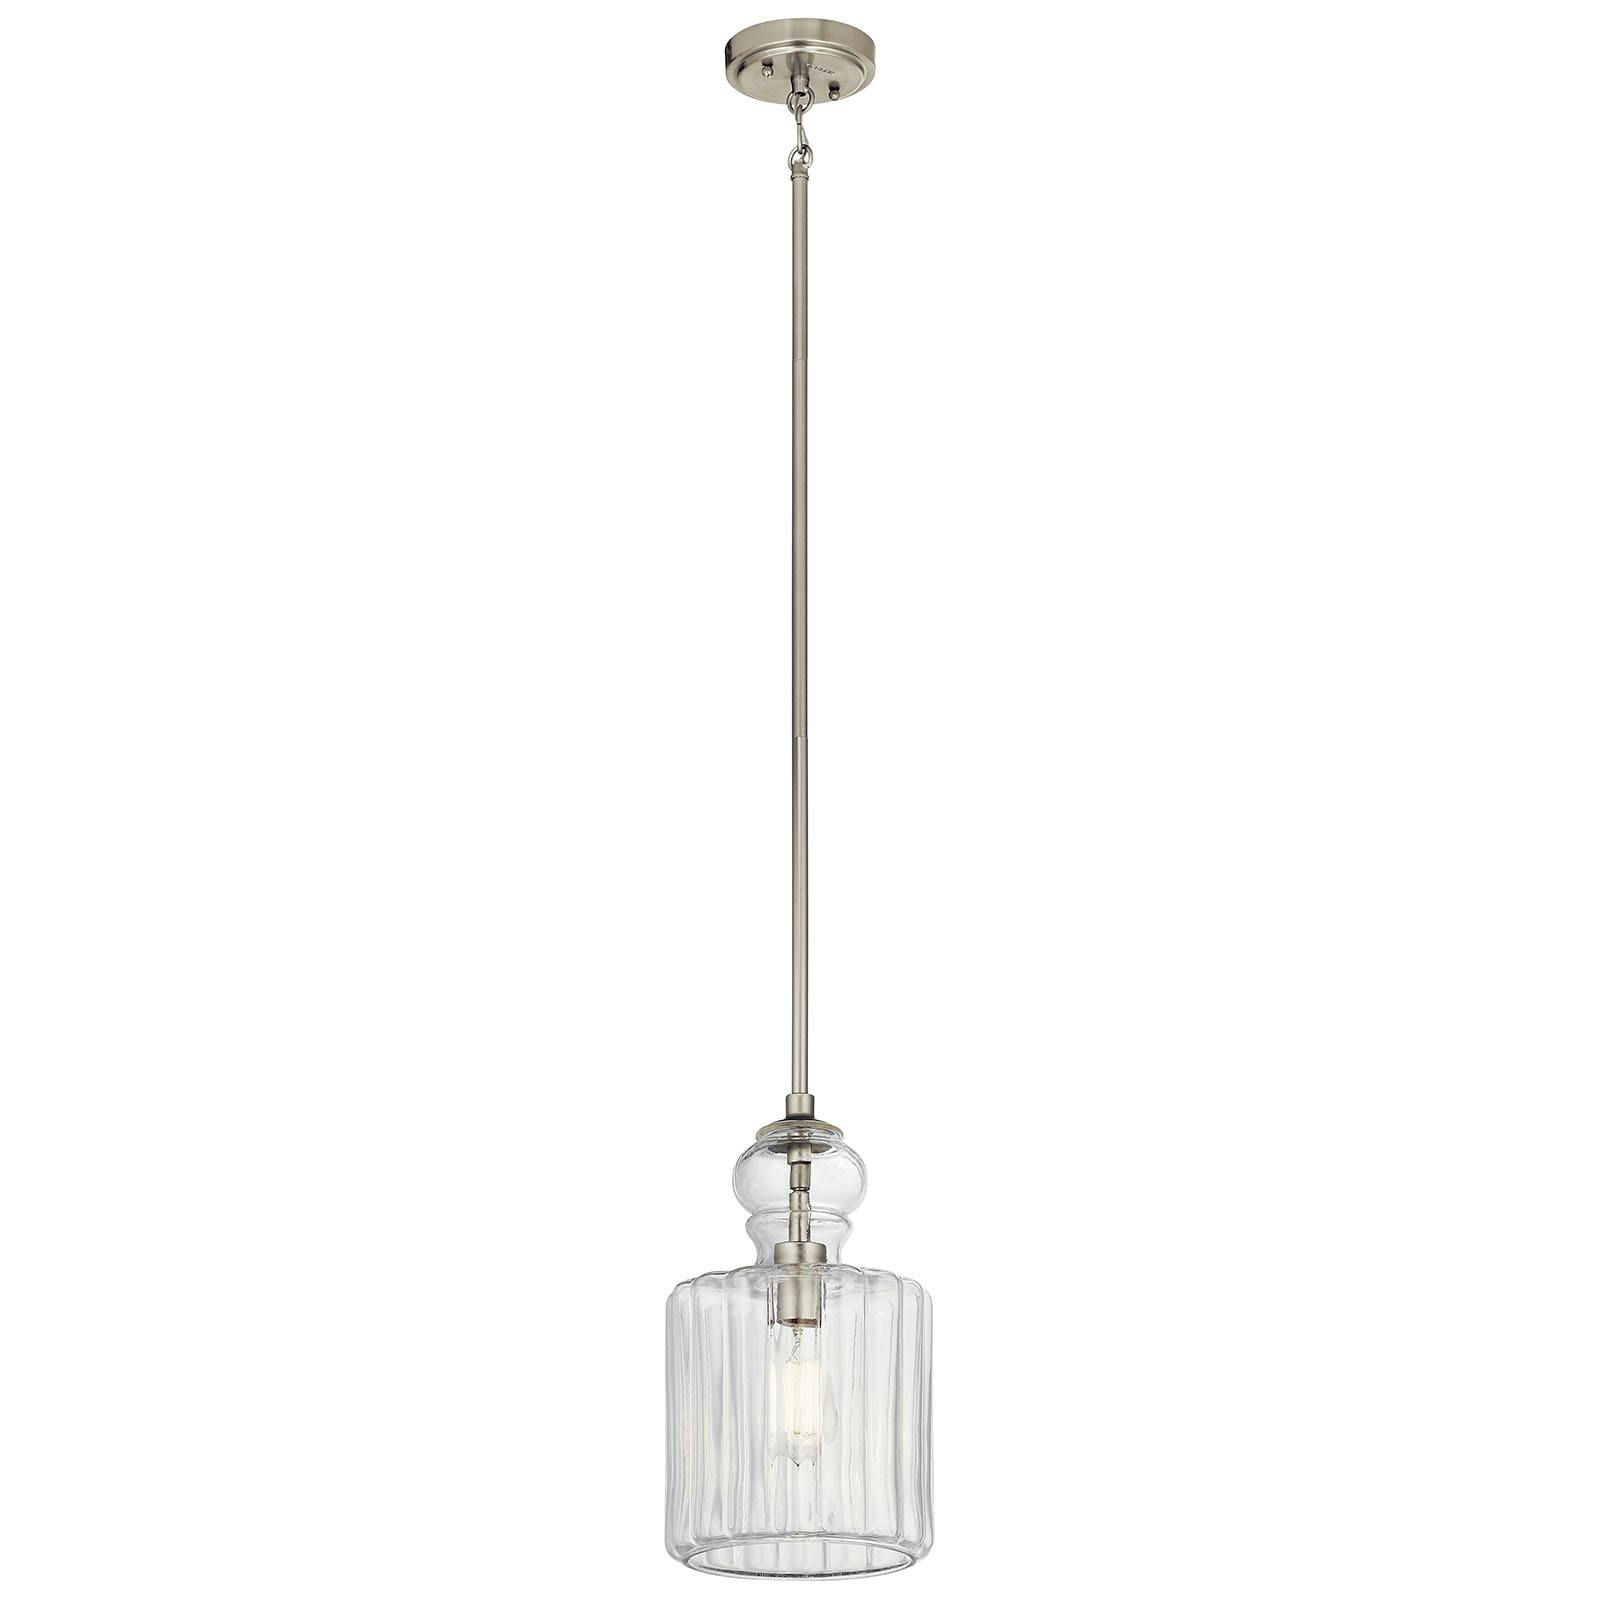 Riviera 13.75" 1 Light Pendant in Nickel on a white background